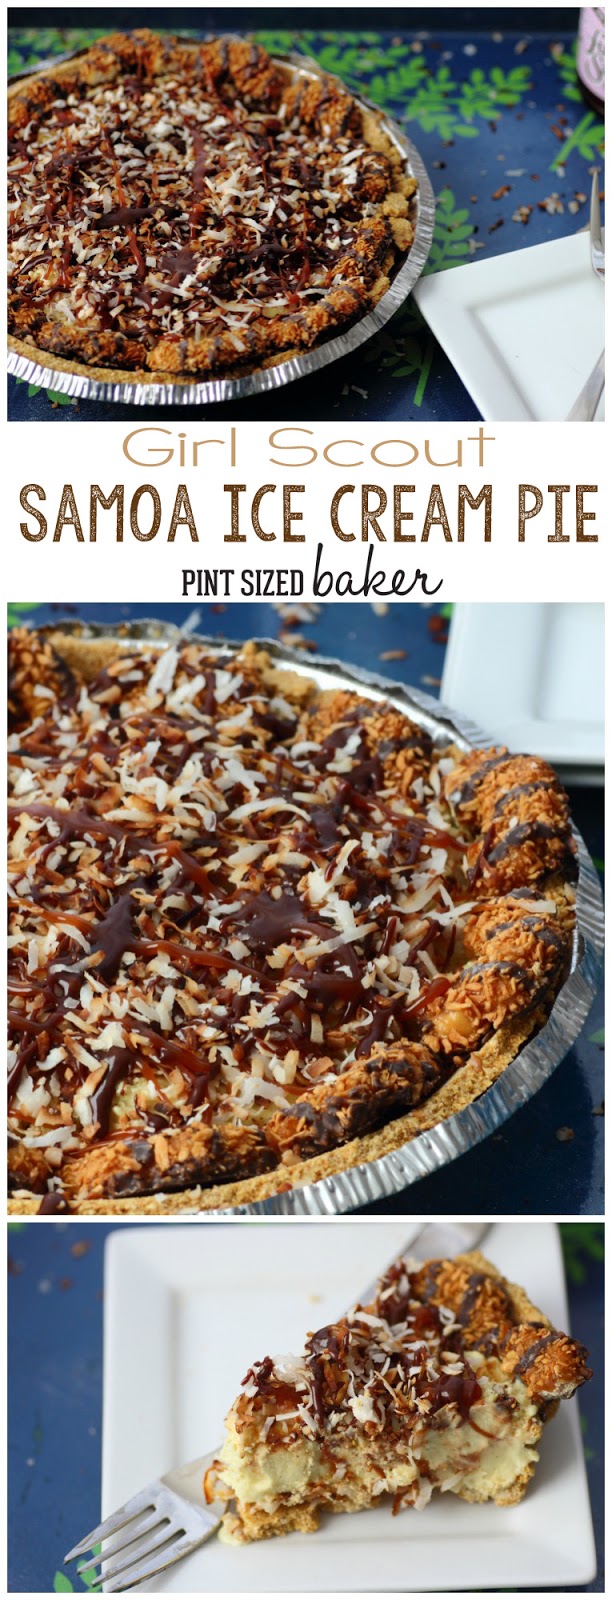 Samoa Ice Cream Pie loaded with Caramel and Fudge Sauce and toasted Coconut. It's my new favorite pie!